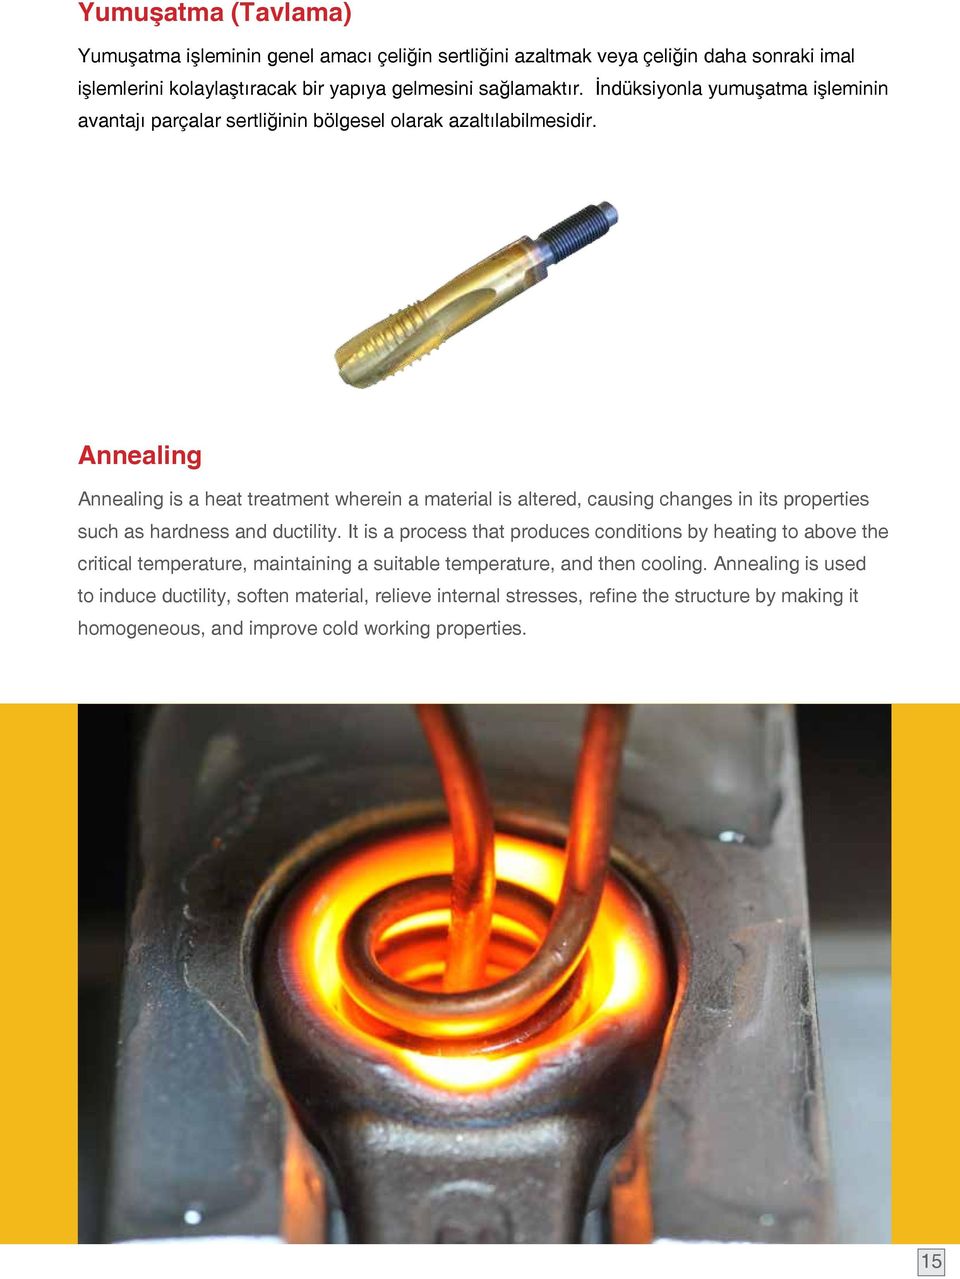 Annealing Annealing is a heat treatment wherein a material is altered, causing changes in its properties such as hardness and ductility.